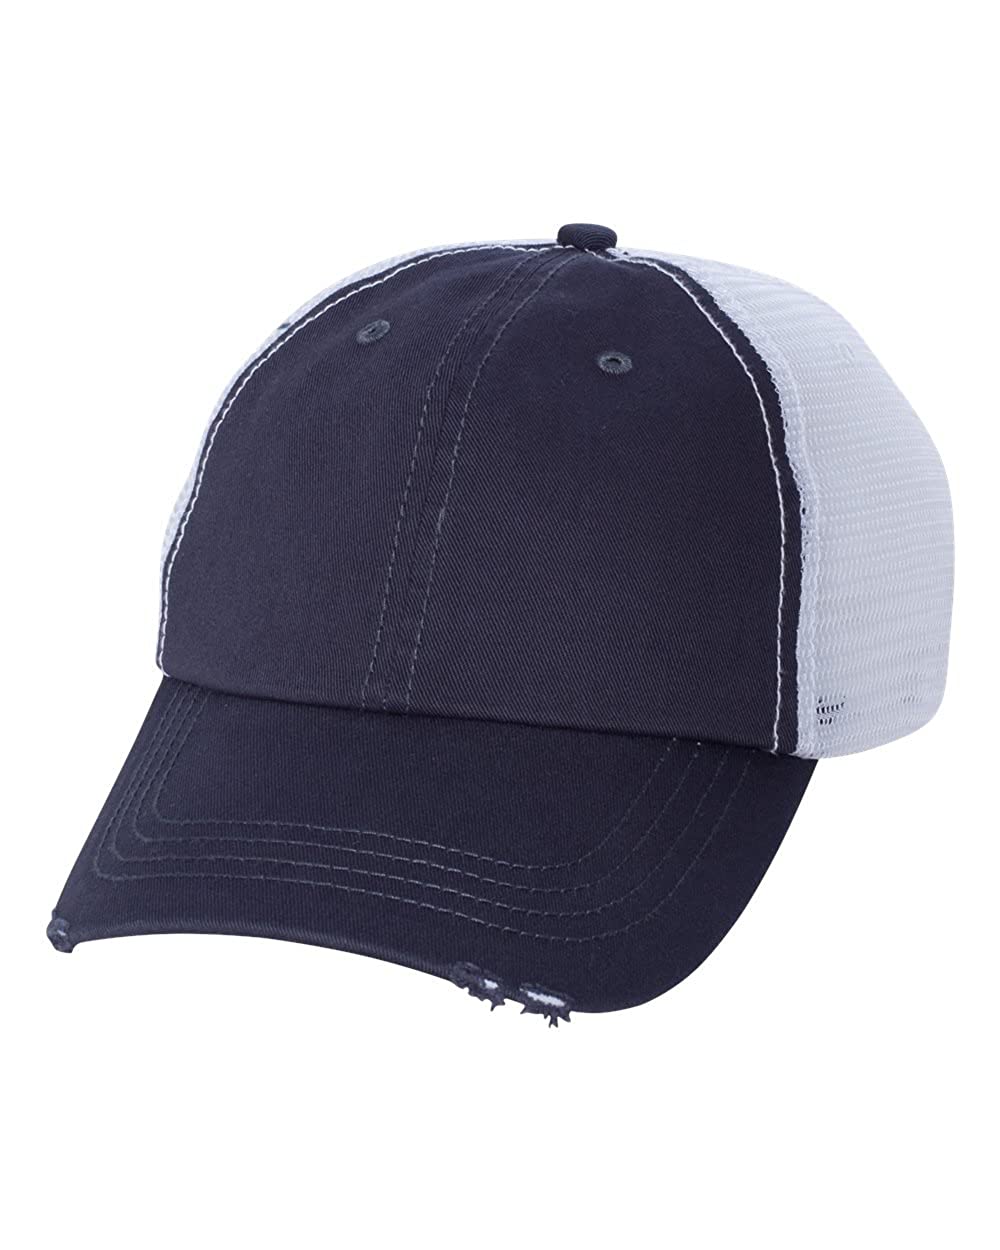 Organic Cotton Washed Mesh Cap with Frayed Bill - Black Black